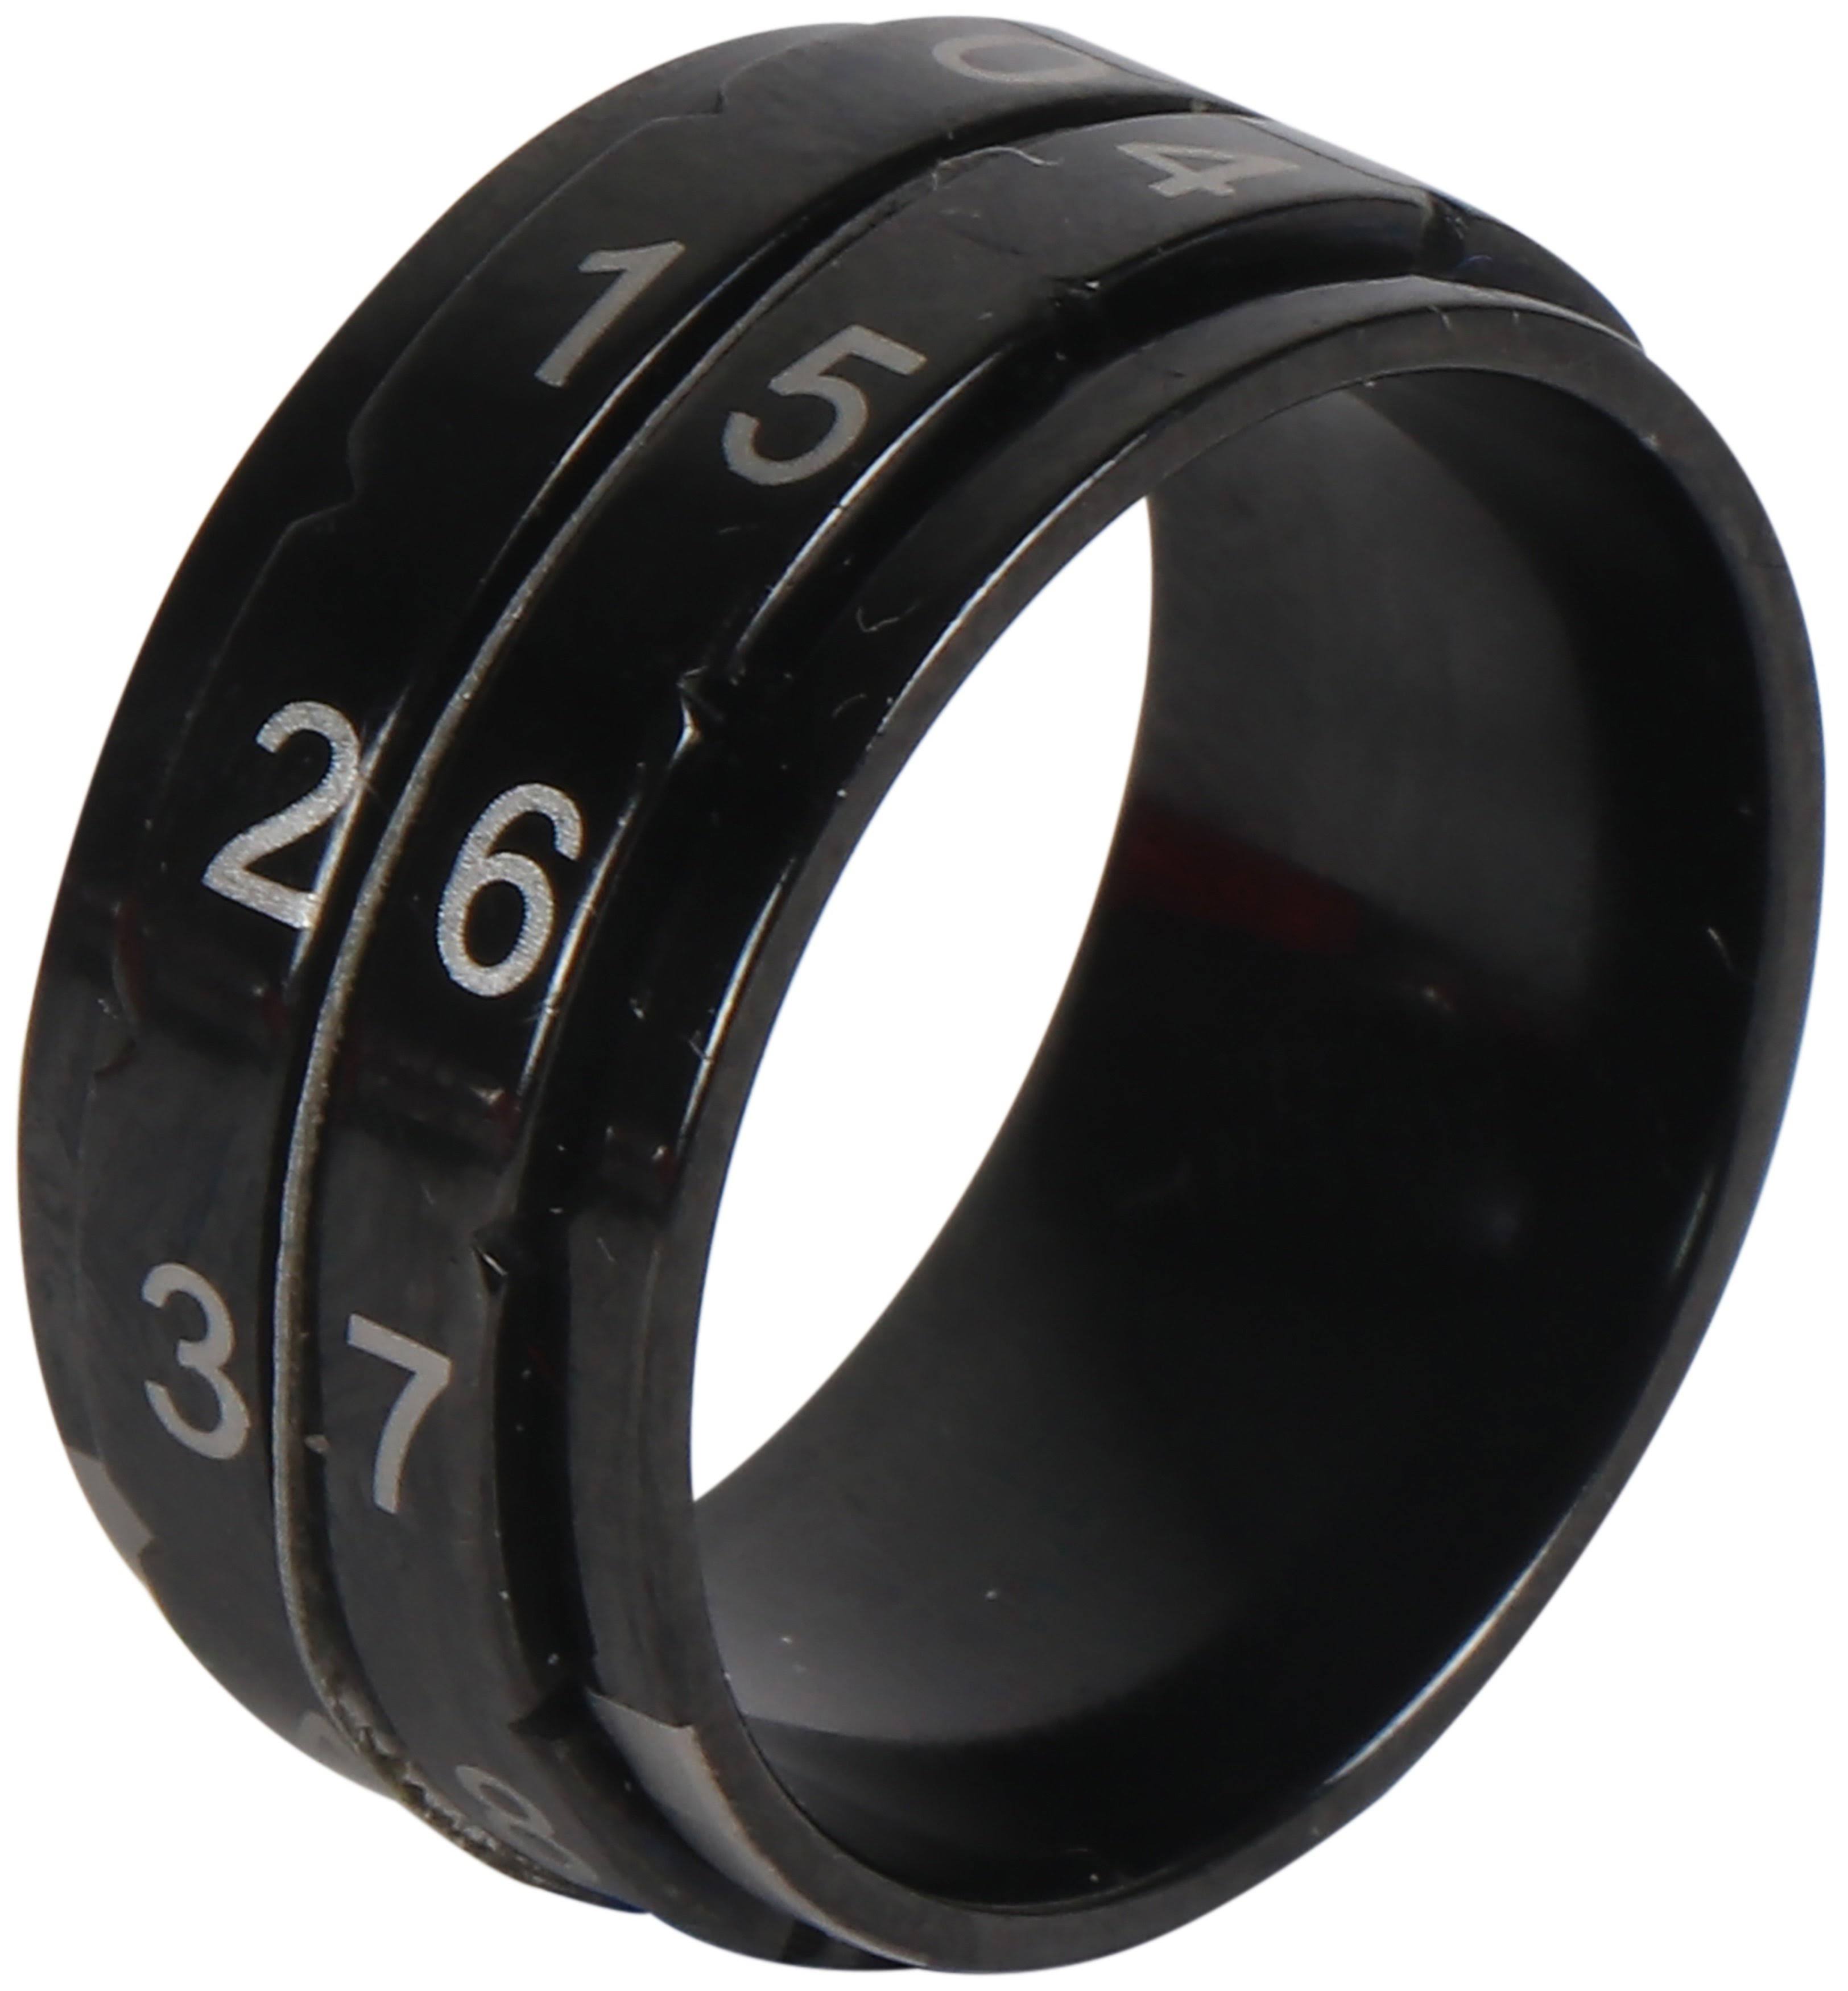 Knitter's Pride Row Counter Ring Size 11: 20.6mm Diameter